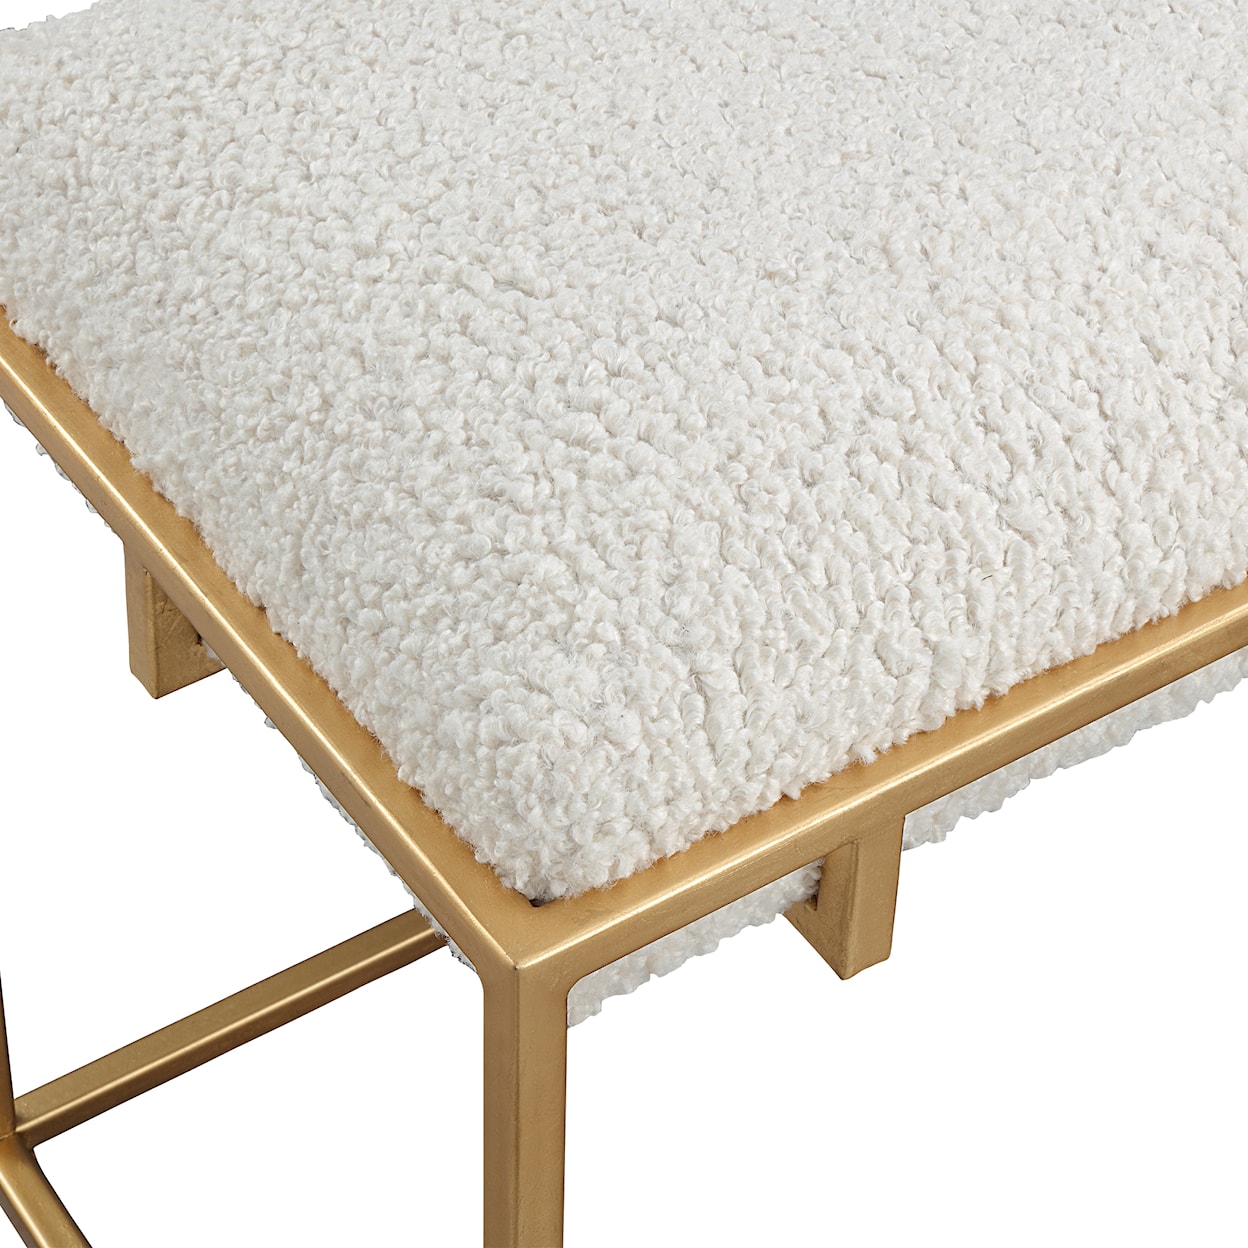 Uttermost Paradox Paradox Small Gold & White Shearling Bench